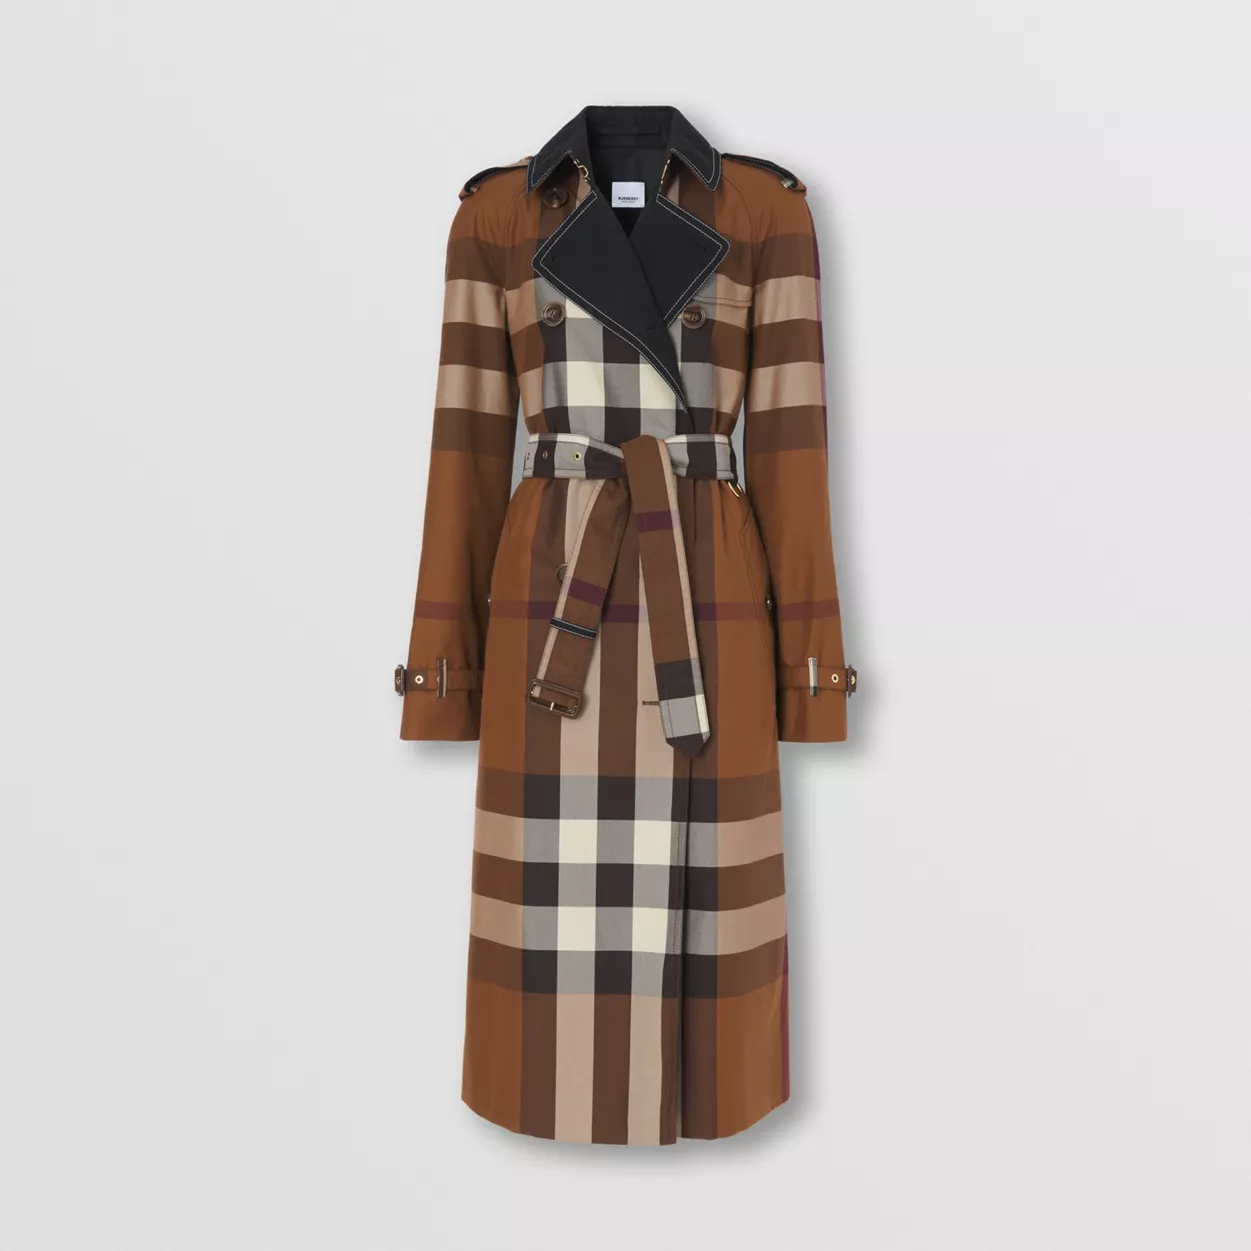 Contrast Panel Check Cotton Trench CoatPrice £2,190 £2,190